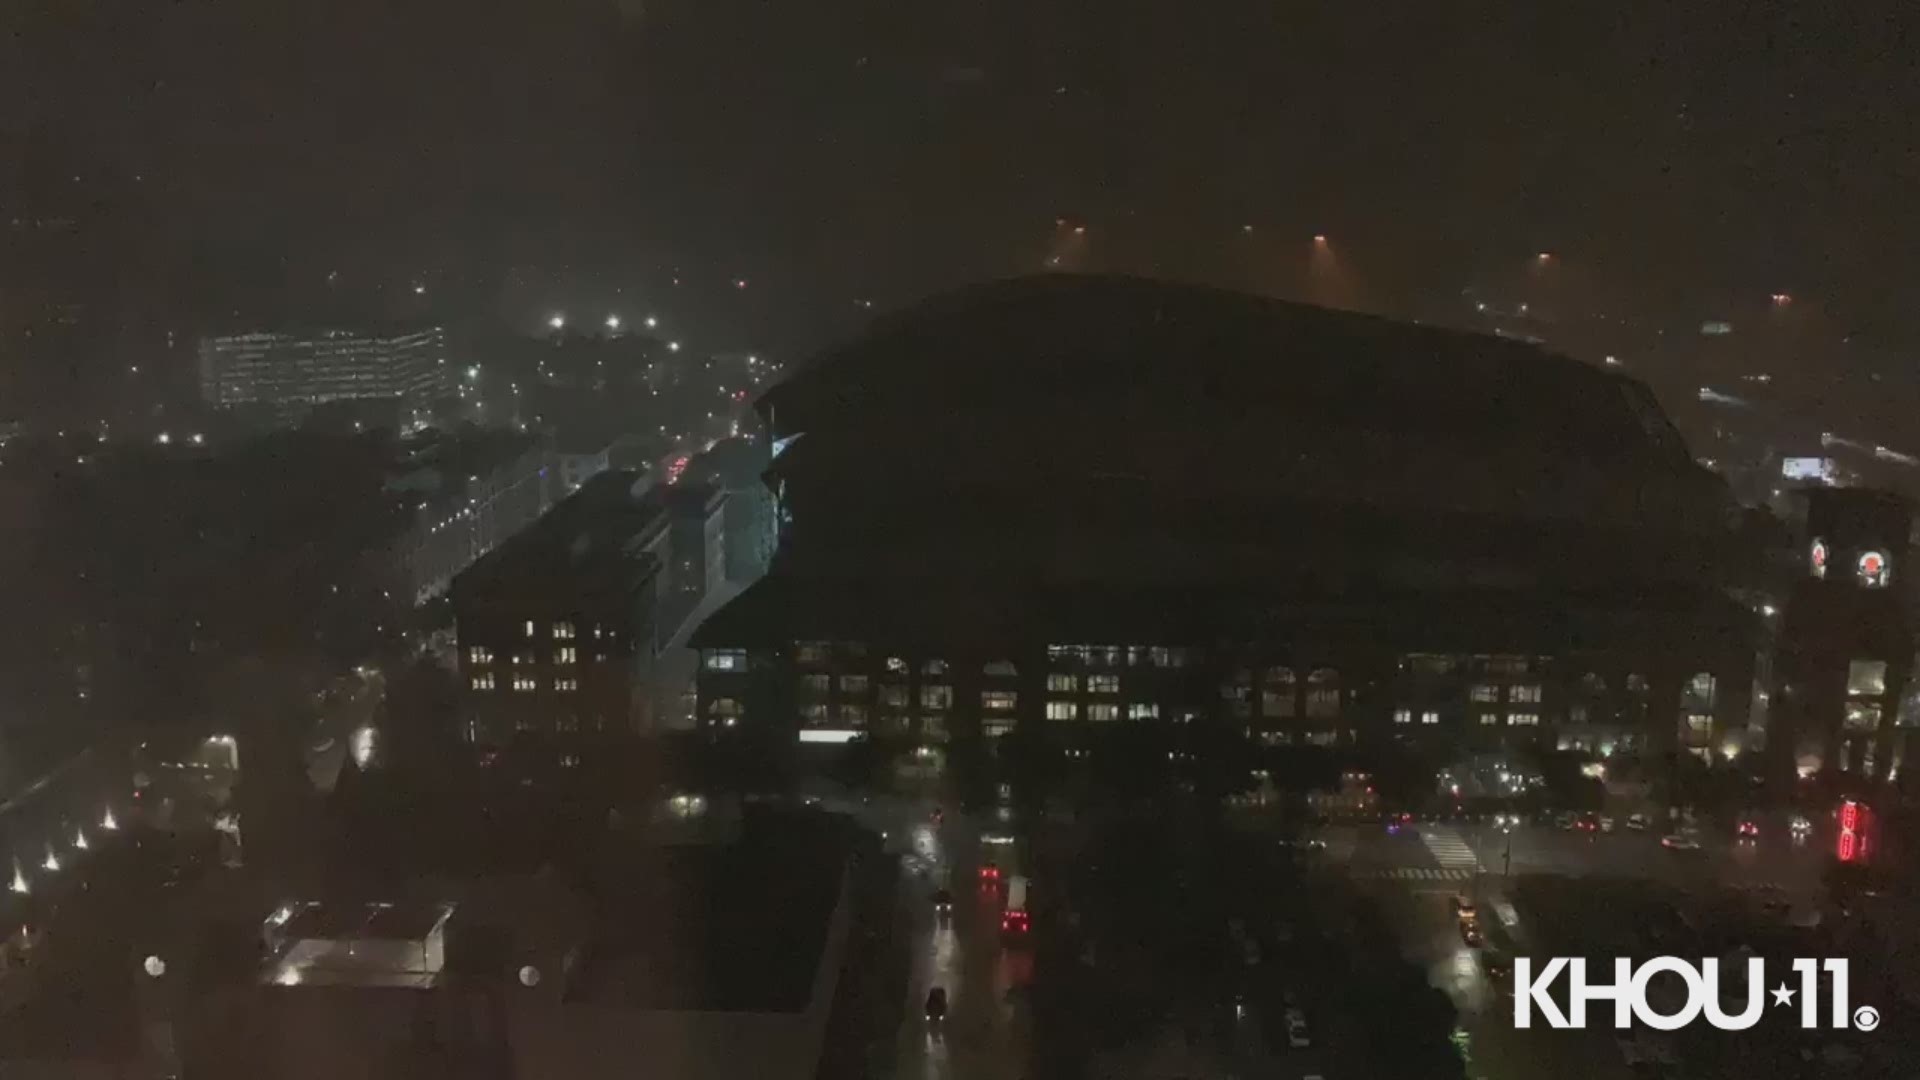 Fans took cover after it started raining inside Minute Maid Park during Thursday night game between the Astros and Rangers.